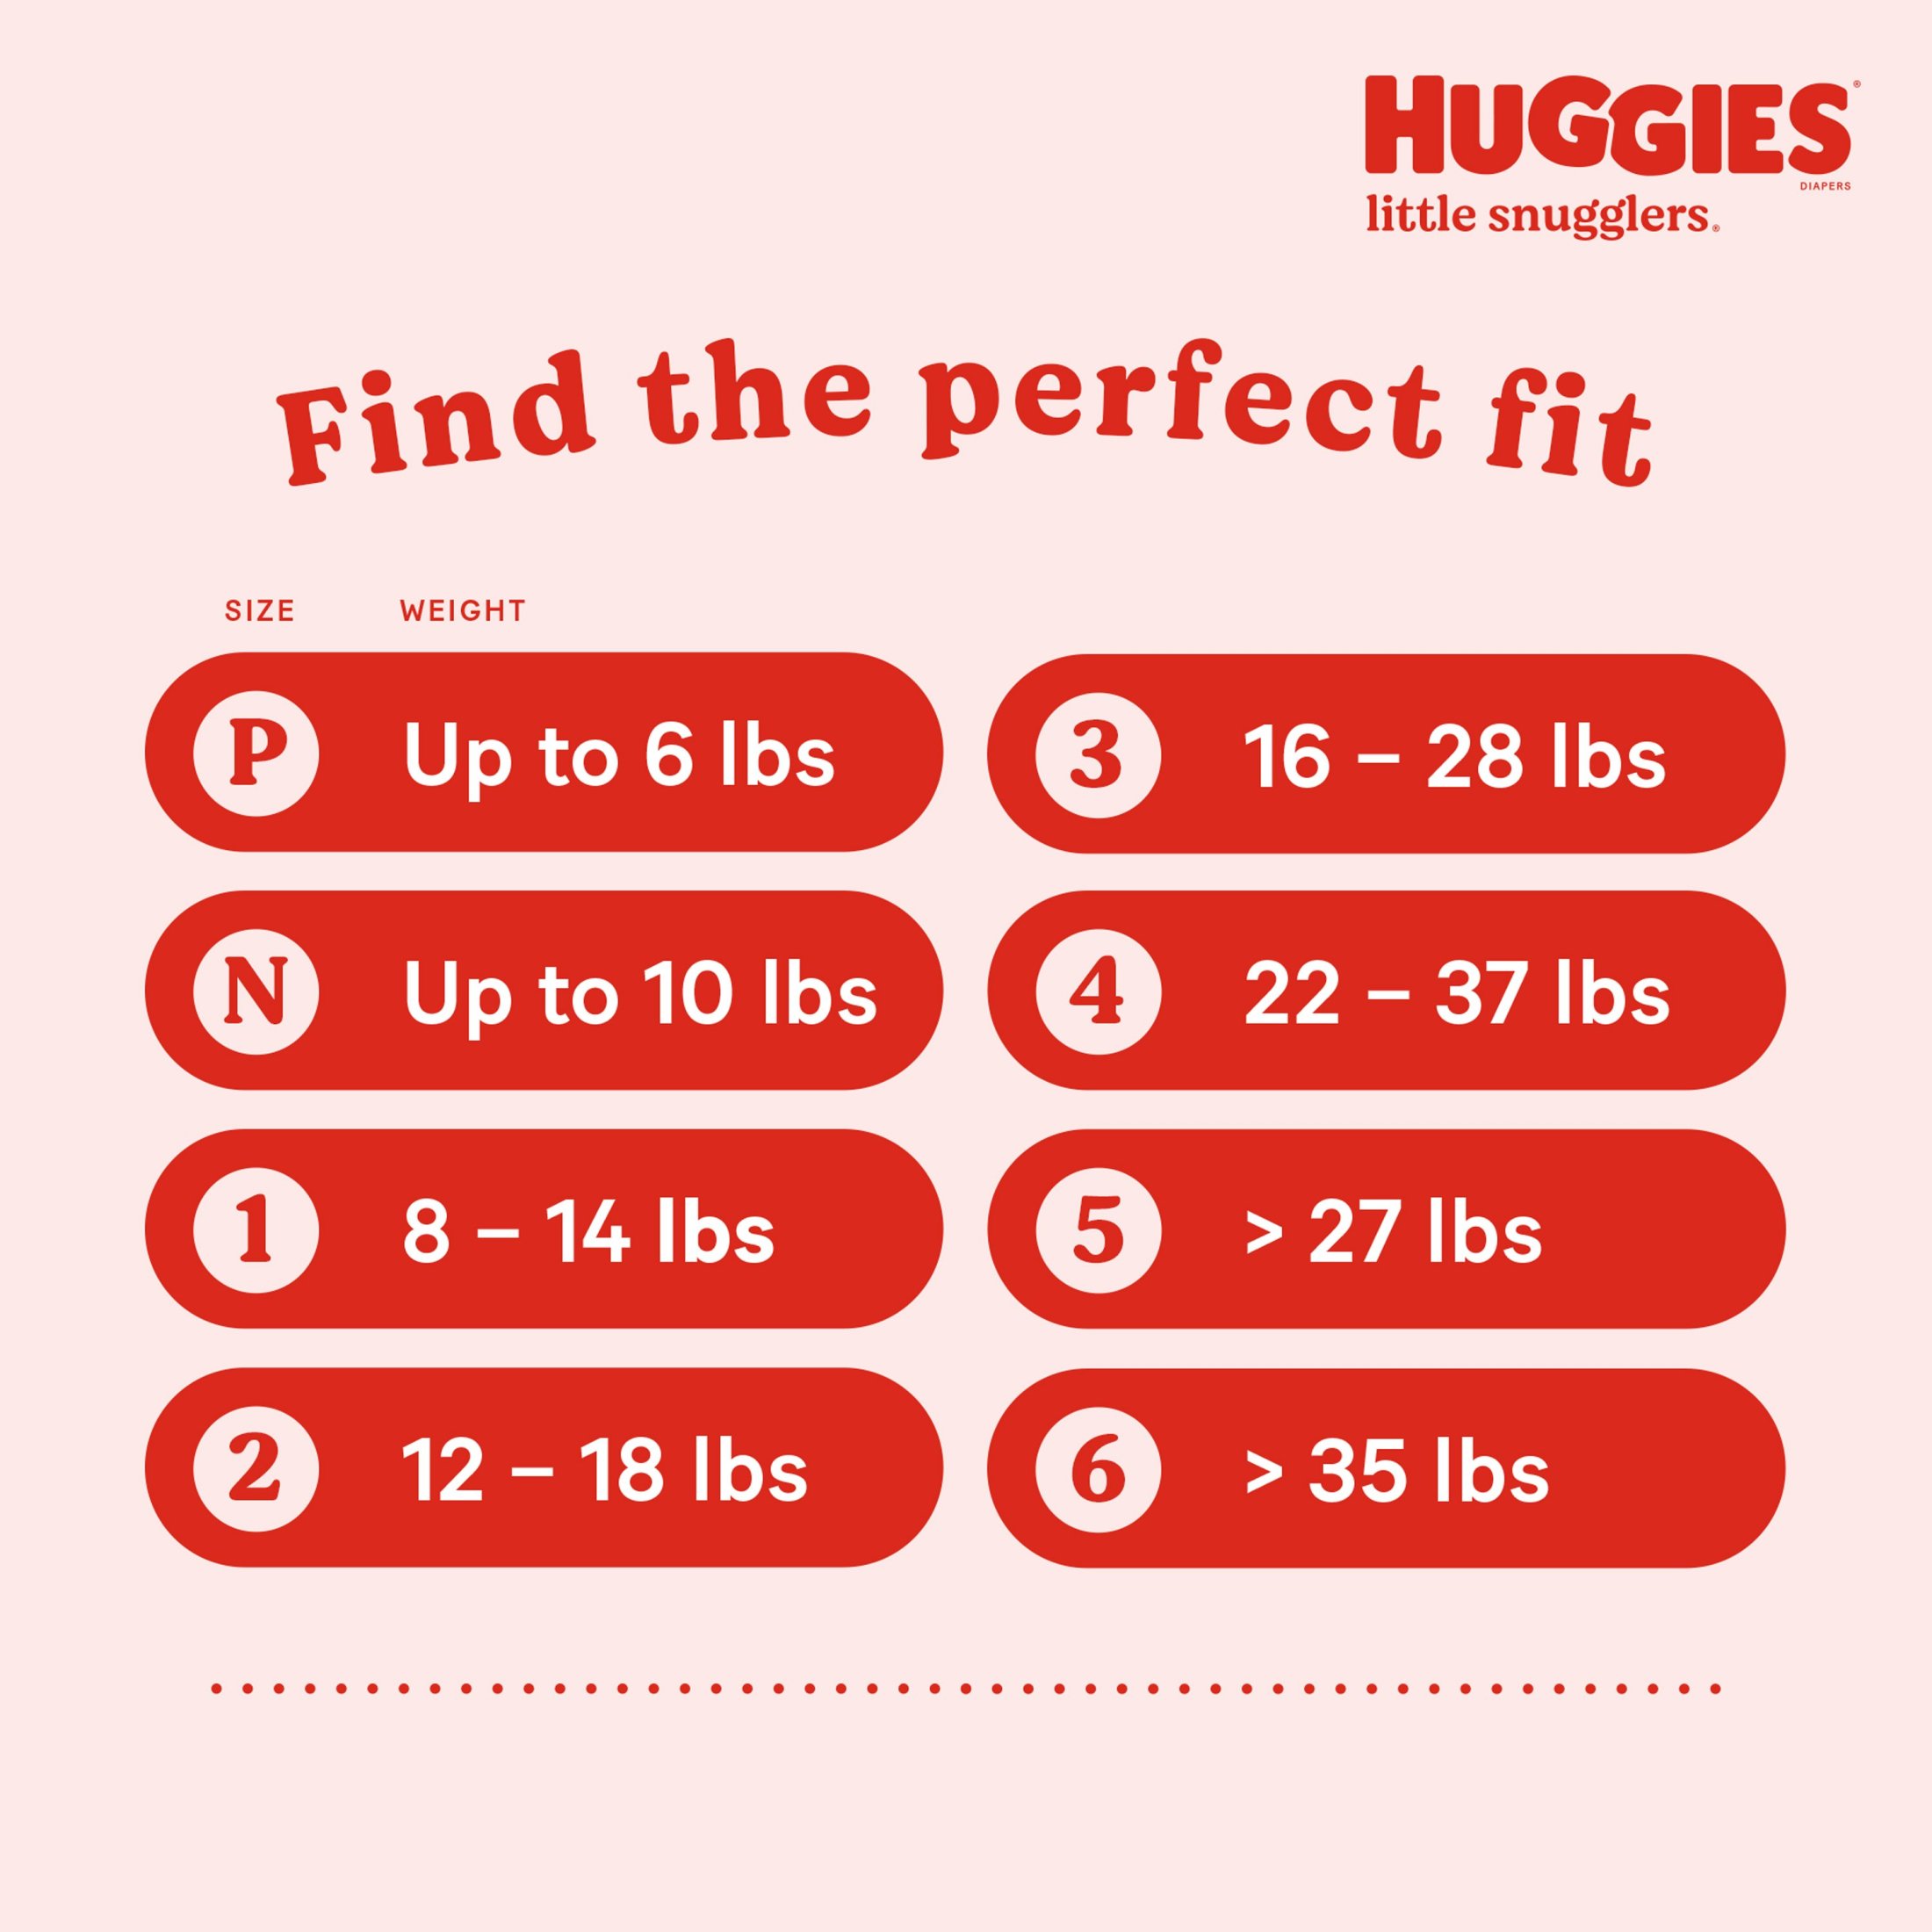 Huggies Little Snugglers Baby Diapers, Size Newborn (up to 10 lbs), 31 Ct (Select for More Options) - image 5 of 16